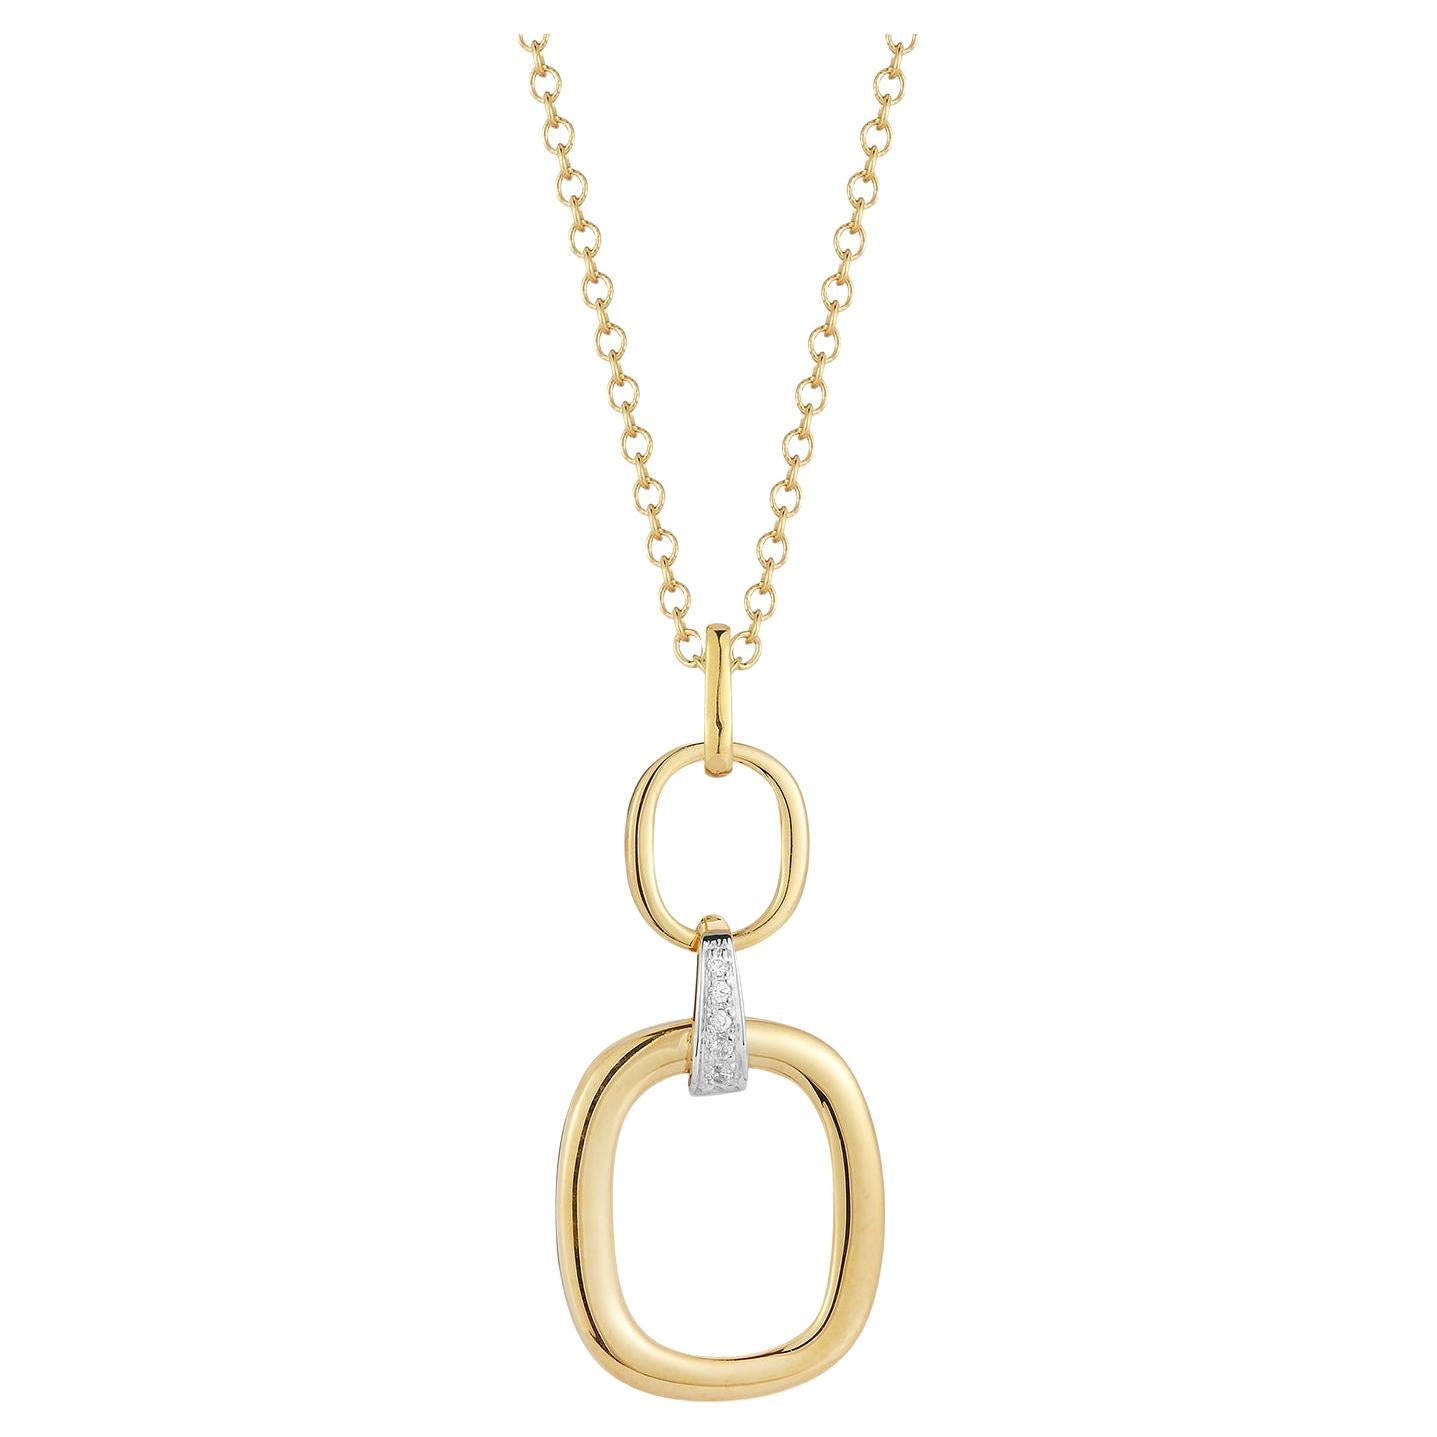 Hand-Crafted 14K Yellow Gold High Polish Graduating Open-Form Pendant For Sale